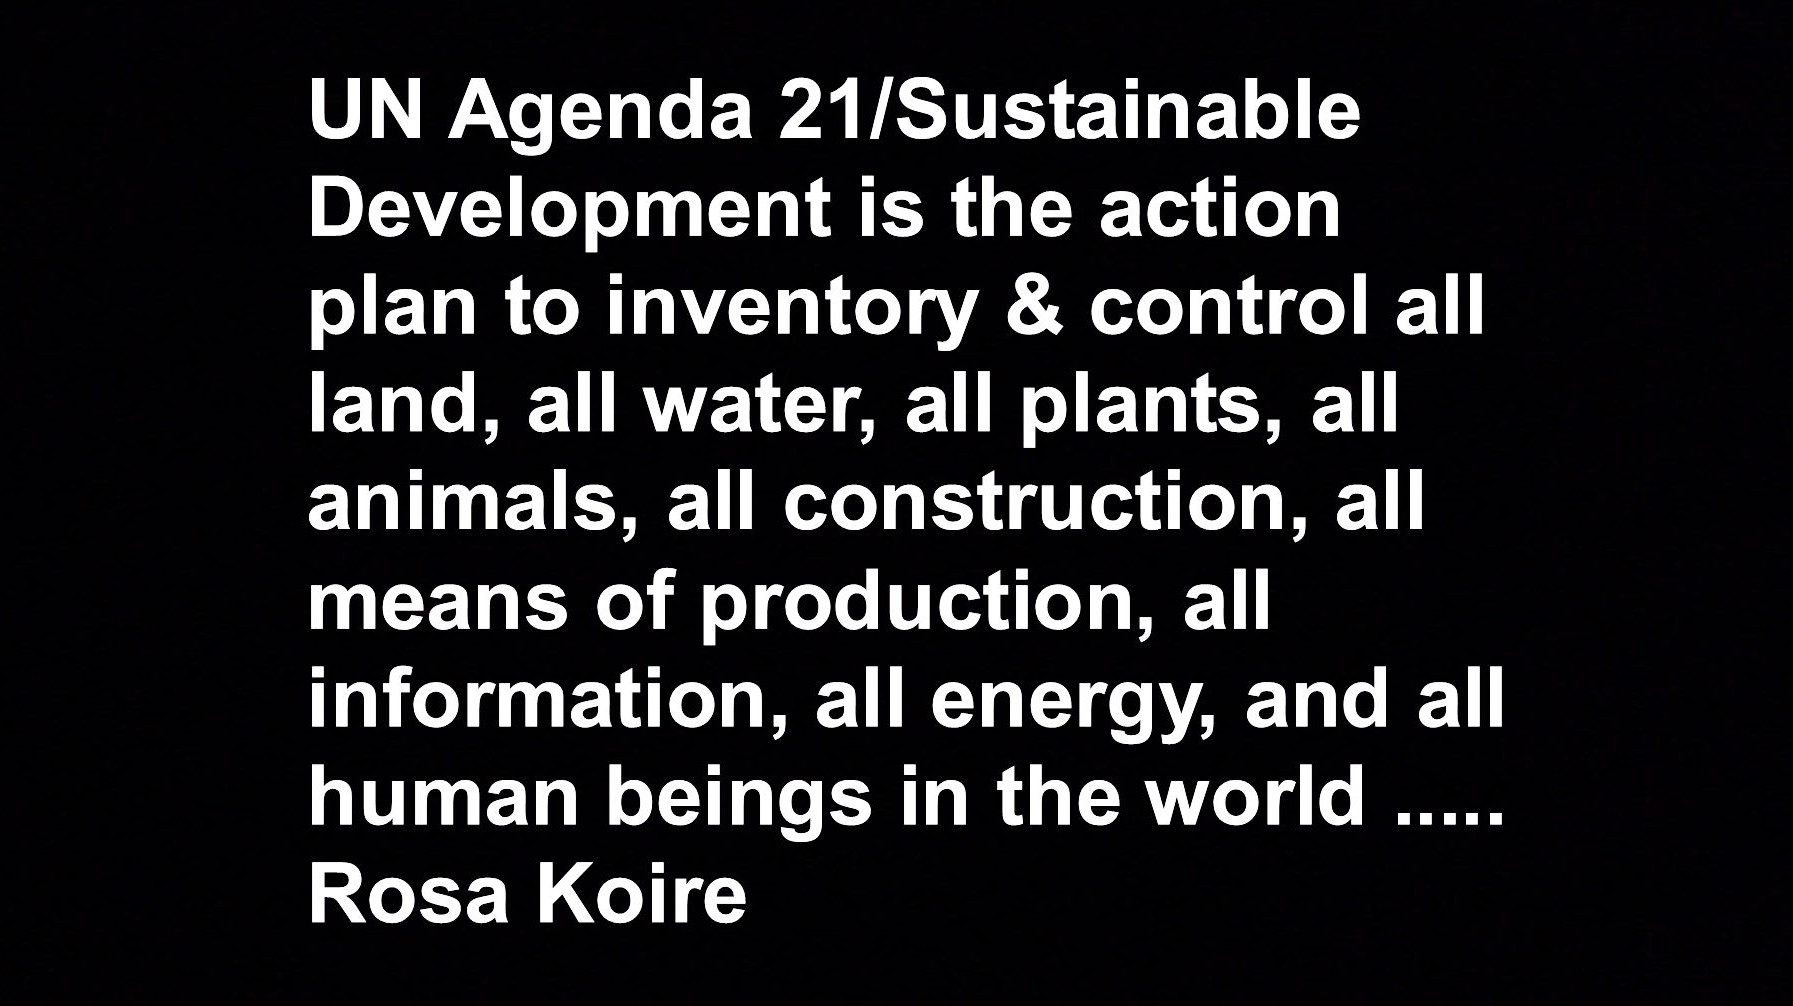 text outlining aims of Agenda 21